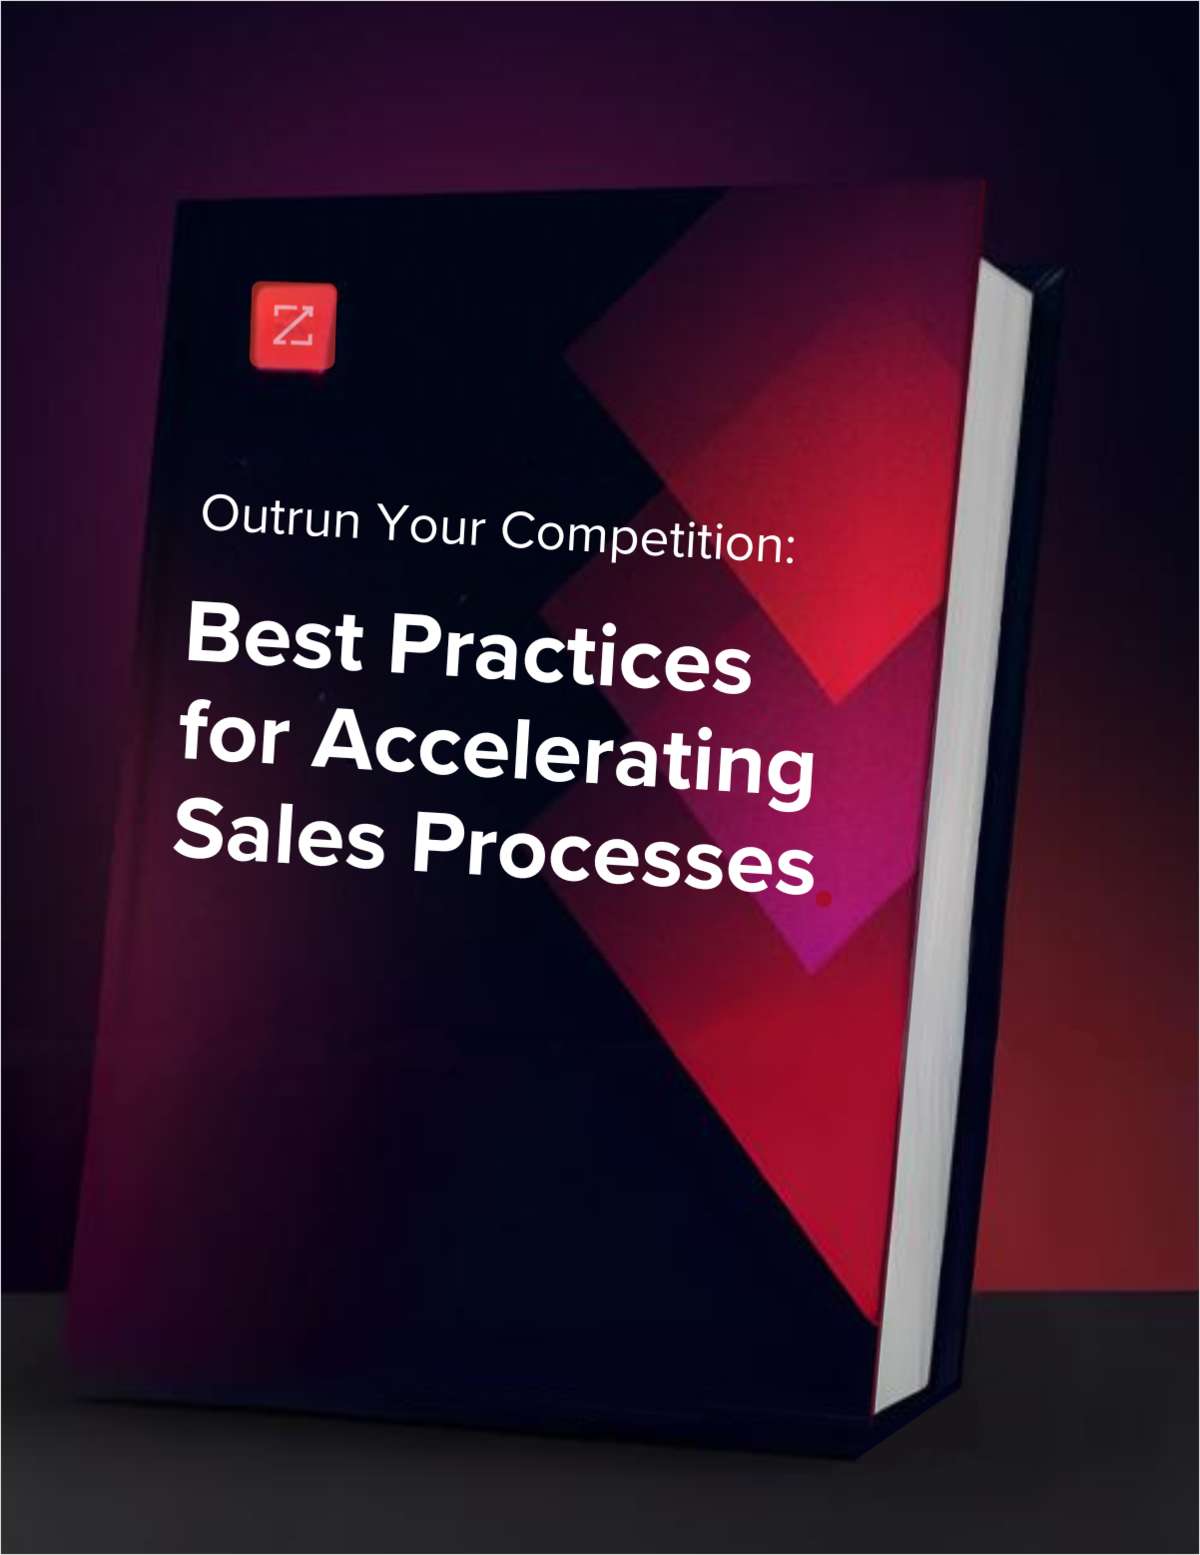 Outrun Your Competition: Best Practices for Accelerating Sales Processes